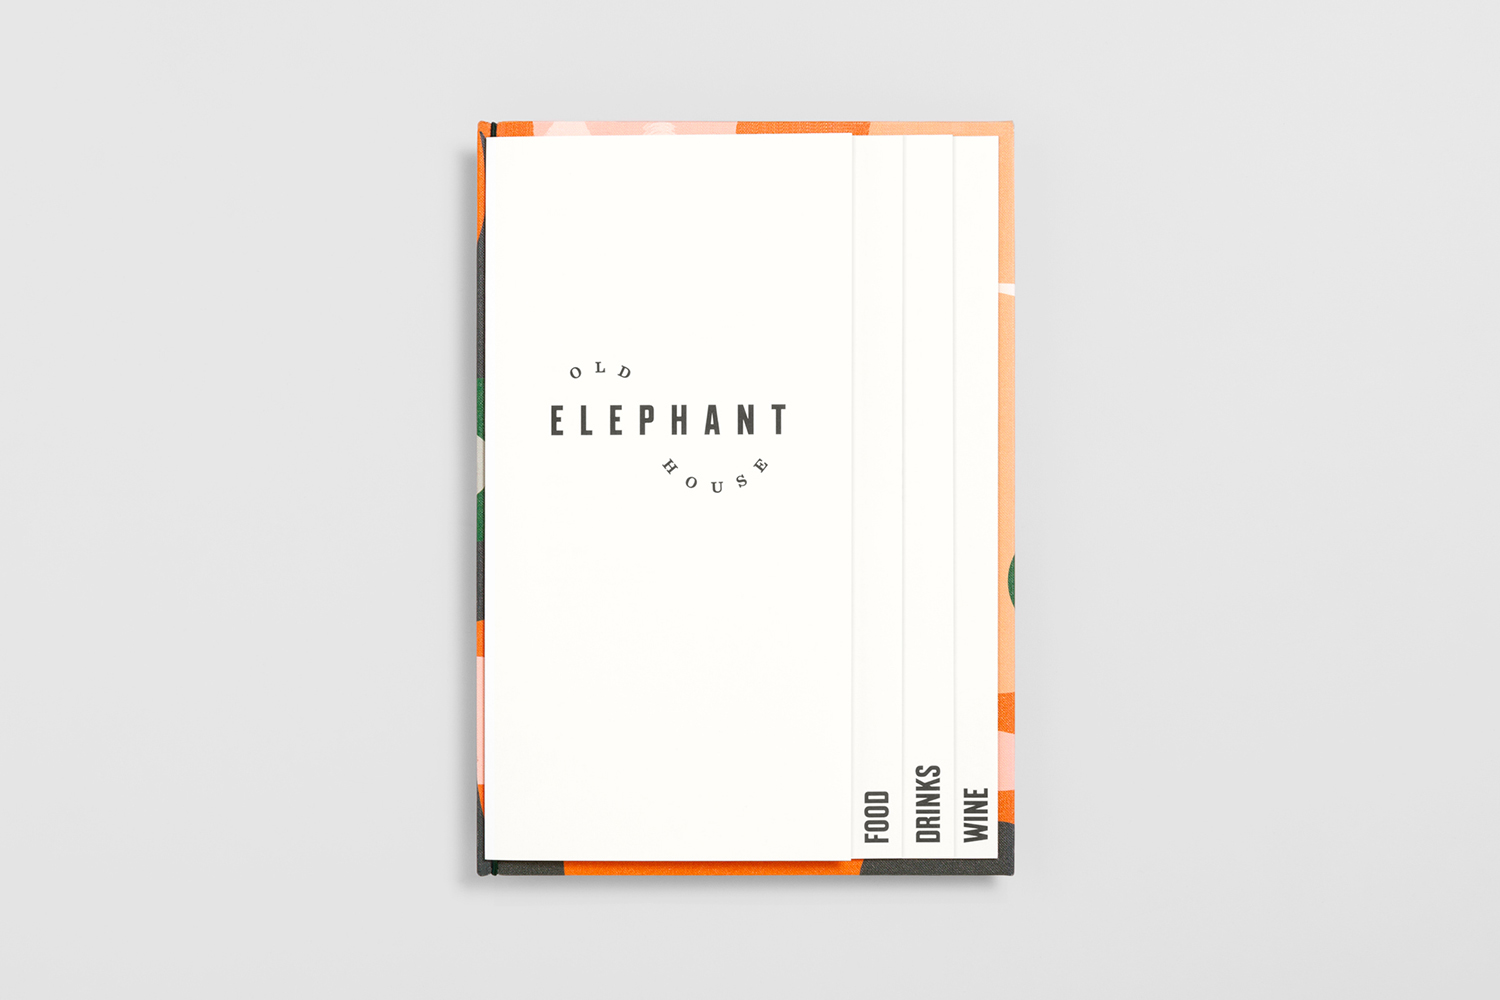 Logo, illustration and menu design by Studio South for brasserie and courtyard bar Old Elephant House at Auckland Zoo